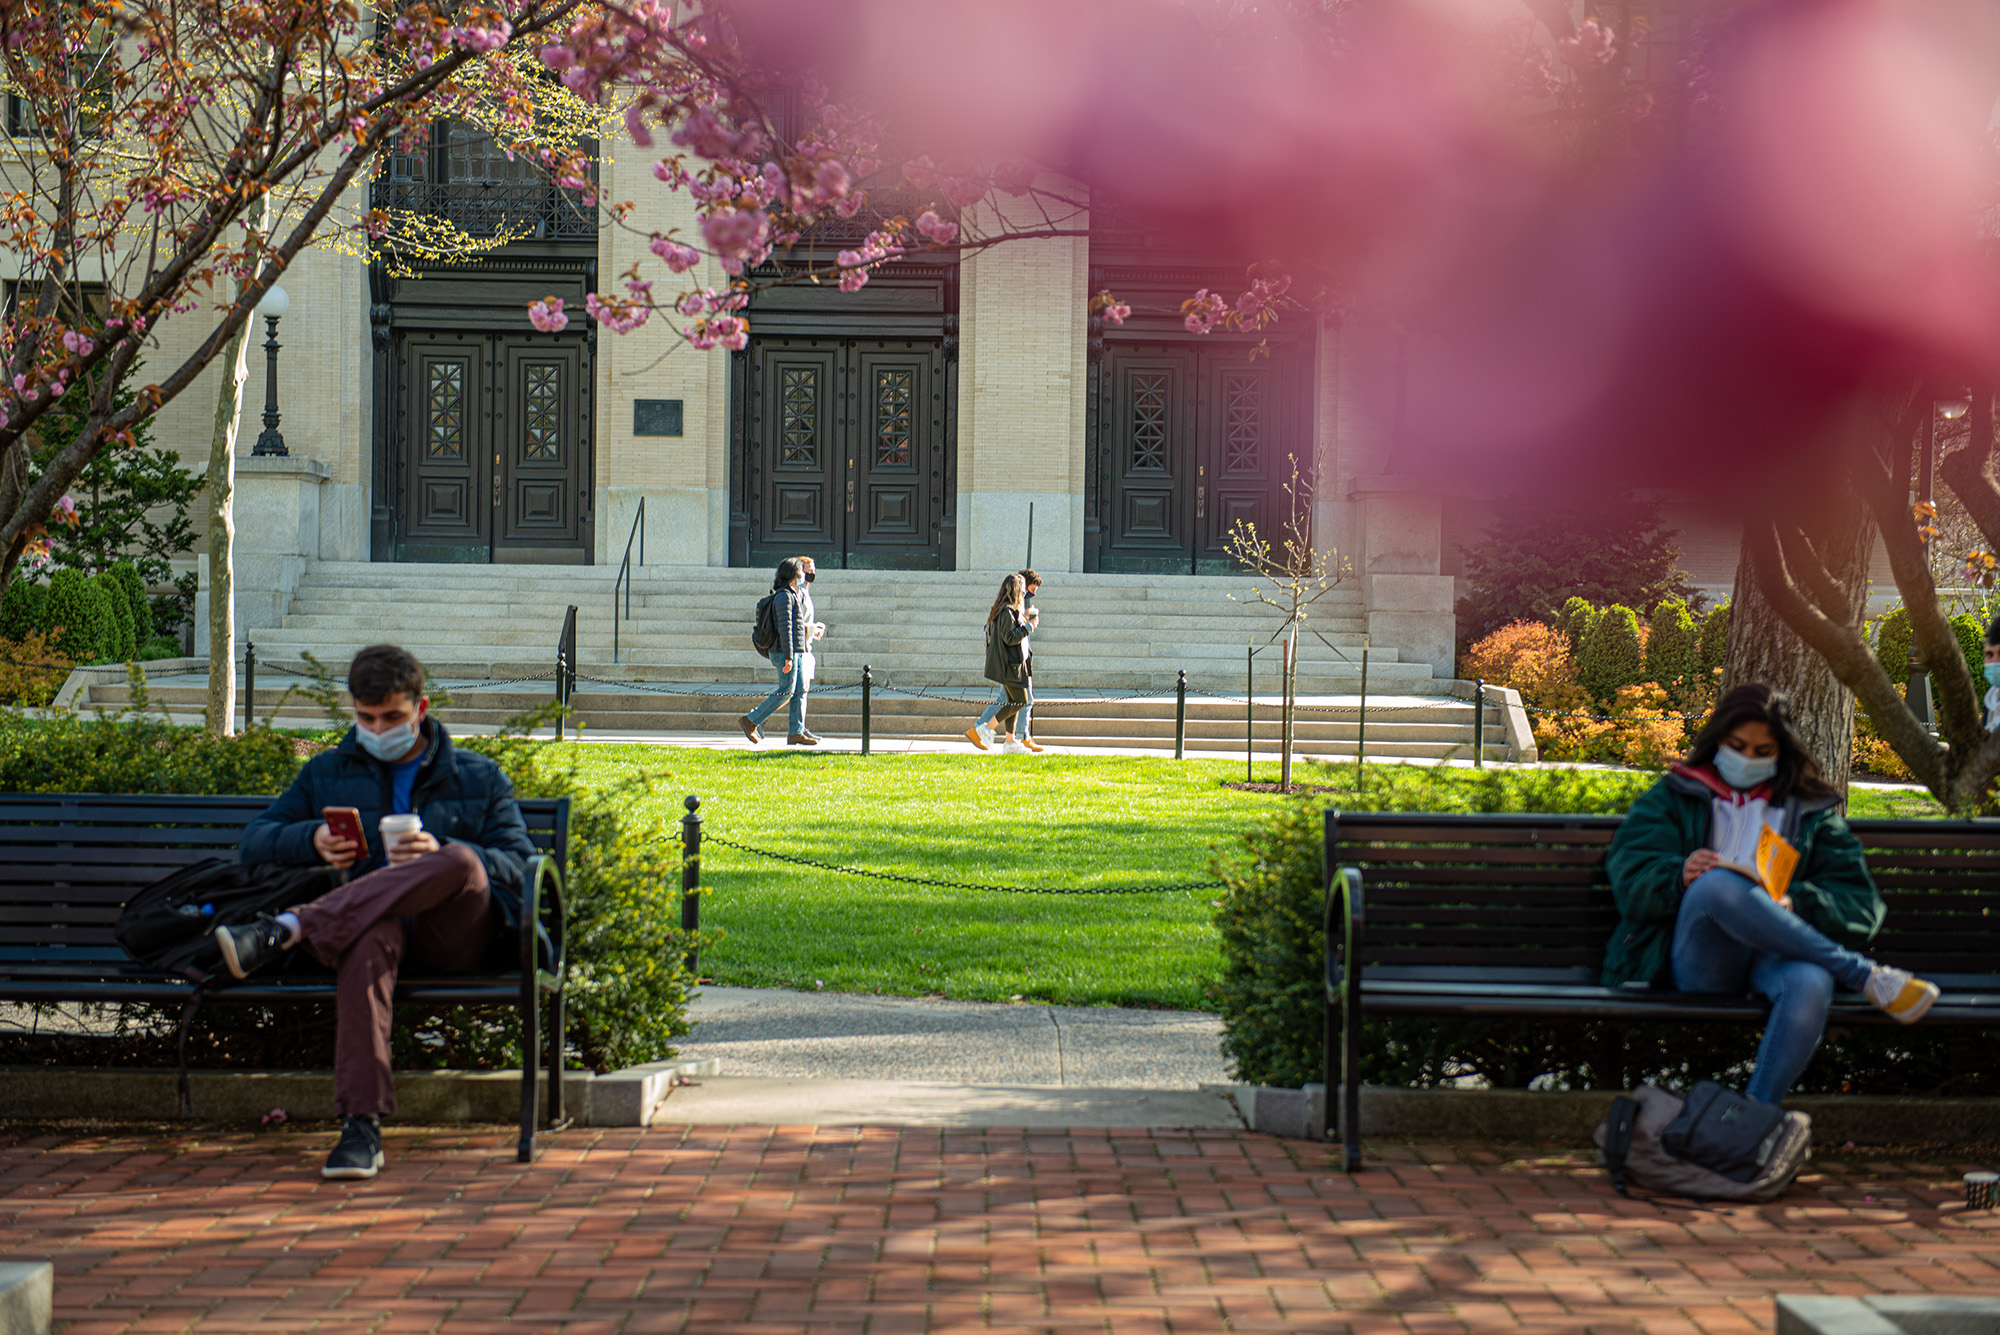 Soft focus pink and purple blurs from blooming flowers frame the top of an image of students sitting on benches. The students are wearing masks and reading. A brick walkway is in the foreground, a series of three double-doors on a tan stone building is in the background.